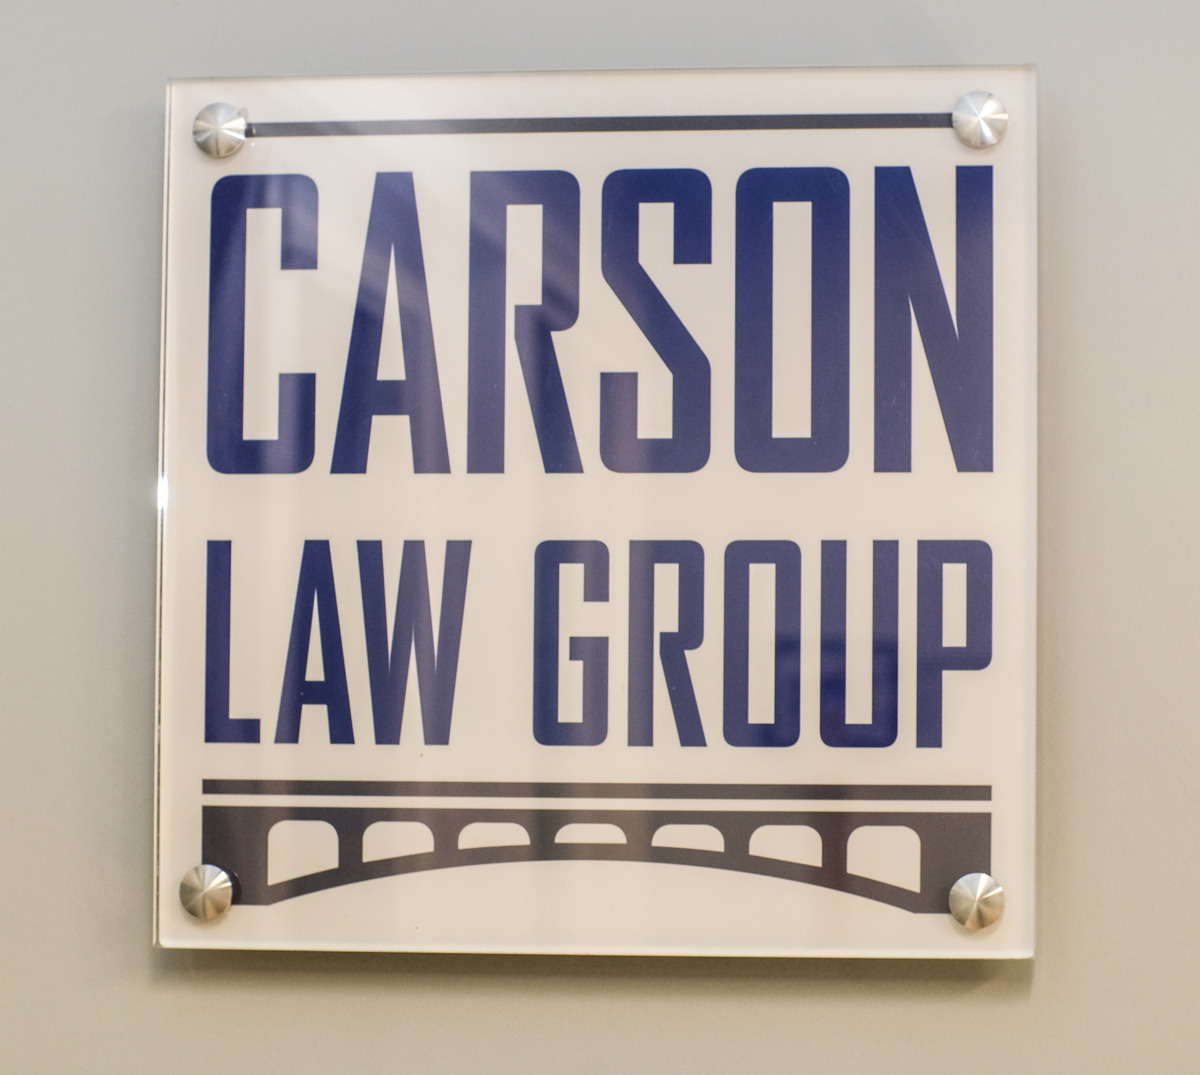 You are currently viewing Carson Law named Best Firm by U.S. News, C-L